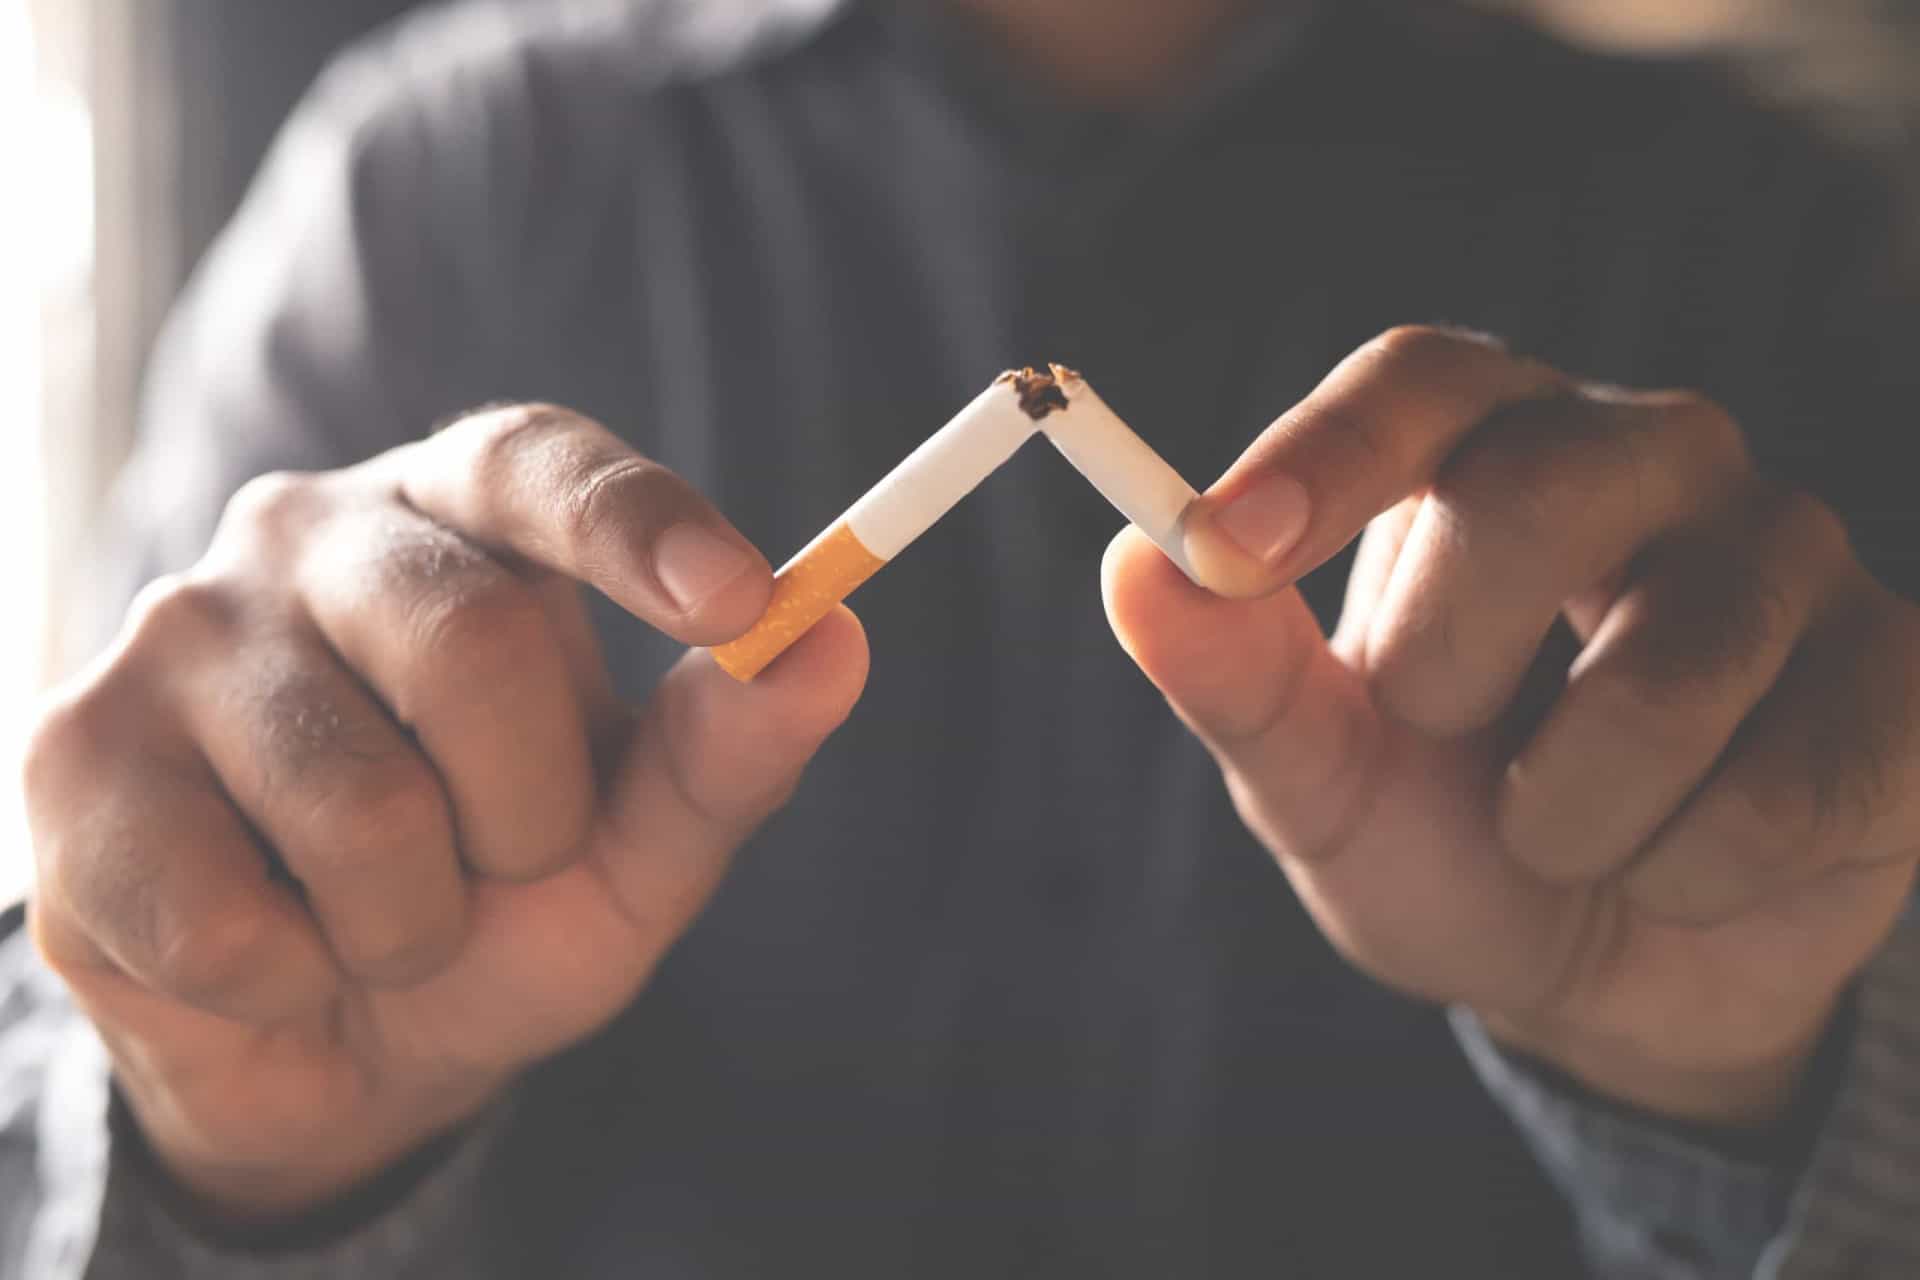 <p><span>Smoking doesn’t just cause lung cancer—it can also raise your blood pressure and affect your circulation, which can impact the blood vessels in the brain.</span></p><p>You may also like:<a href="https://www.starsinsider.com/n/277181?utm_source=msn.com&utm_medium=display&utm_campaign=referral_description&utm_content=443127v4en-ca"> Terrifying urban legends that are actually true</a></p>